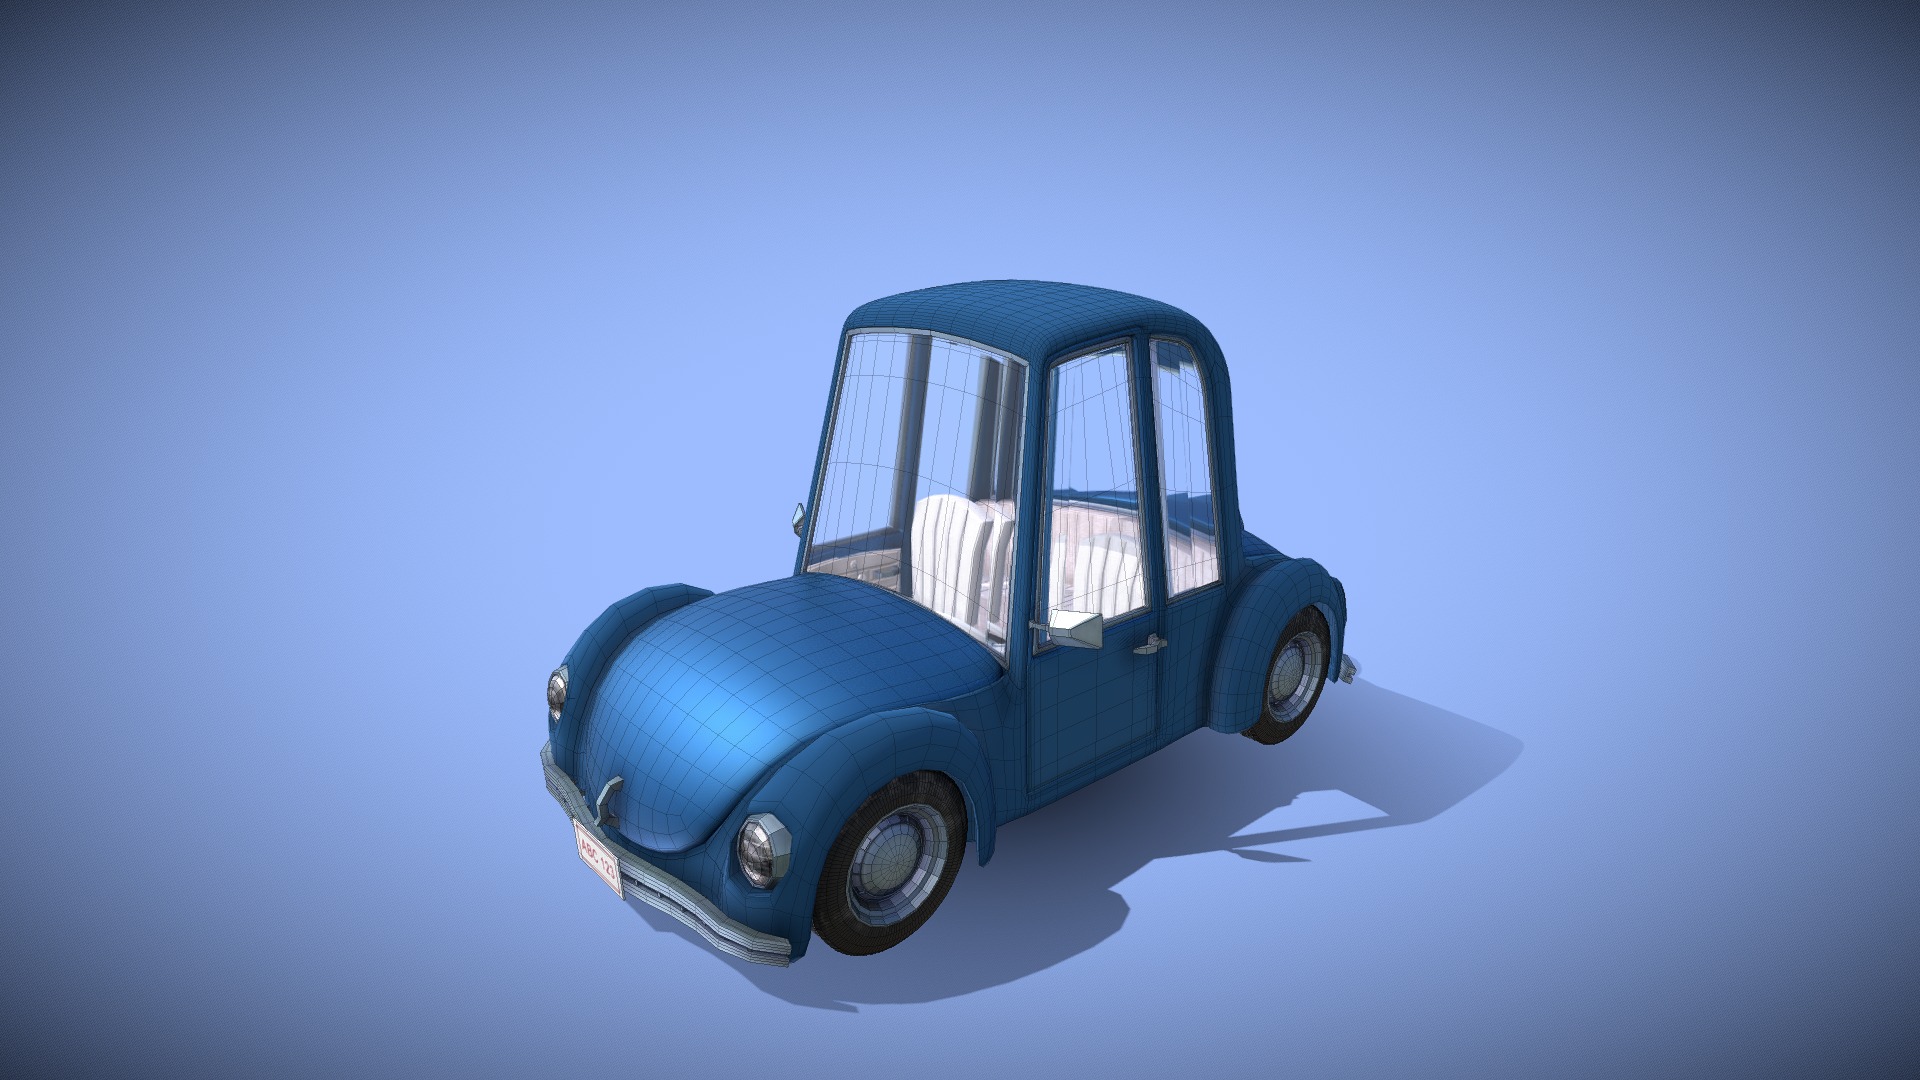 3D model car – beetle – rigged - This is a 3D model of the car - beetle - rigged. The 3D model is about a blue car with a door.